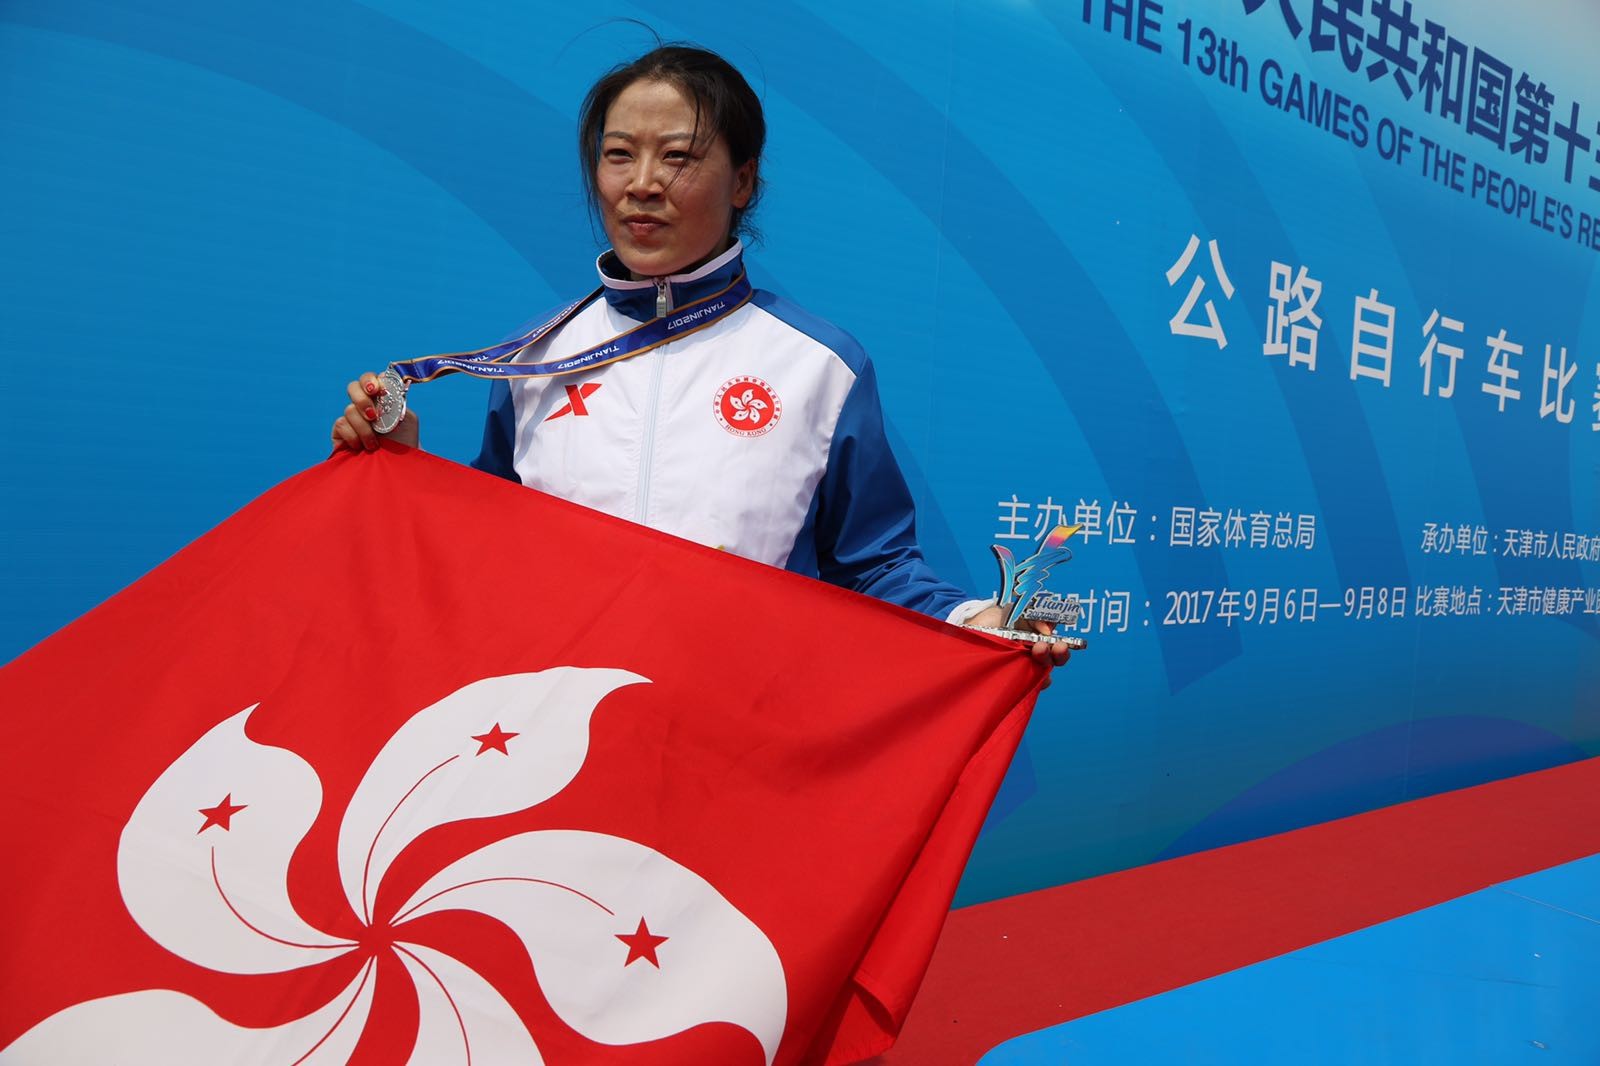 Meng Zhaojuan with her silver medal and the Bauhinia flag. Photo: Hong Kong Cycling Association